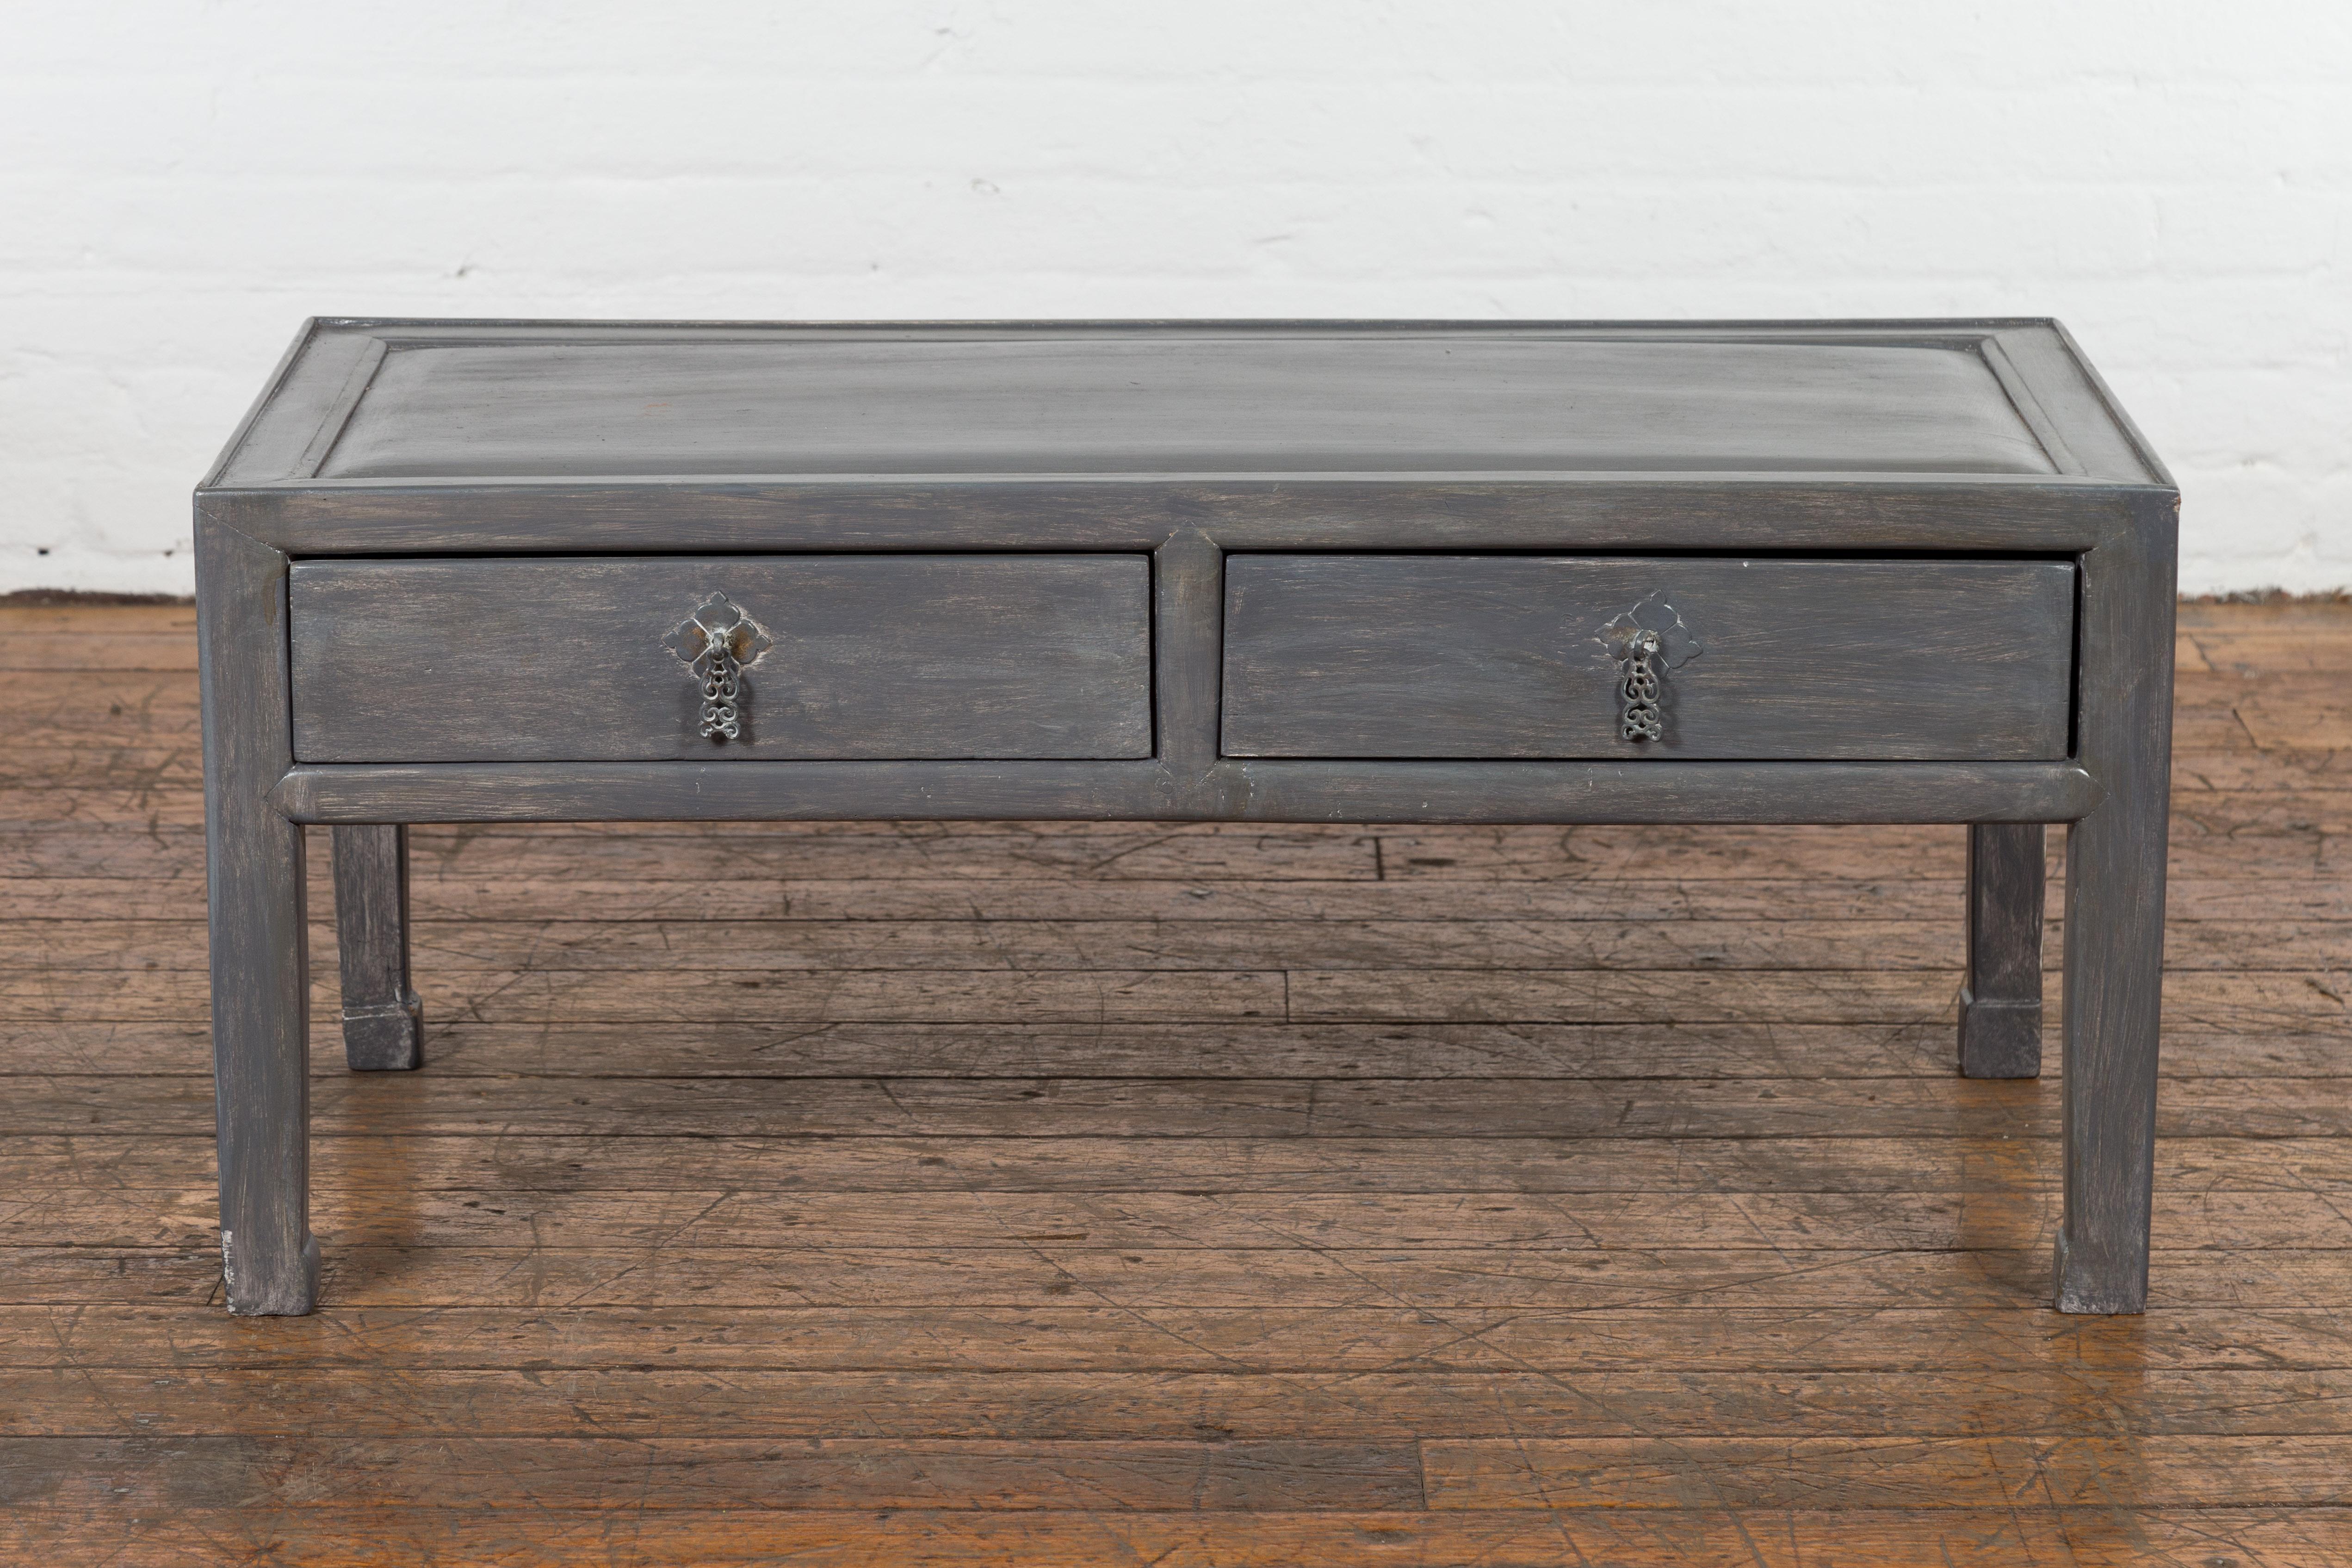 A Chinese late Qing Dynasty low table from the early 20th century, with two drawers, horse hoof legs, slightly recessed top, newly and professionally refreshed with a silver grey lacquer with white underlay, perfect to be used as a coffee table.